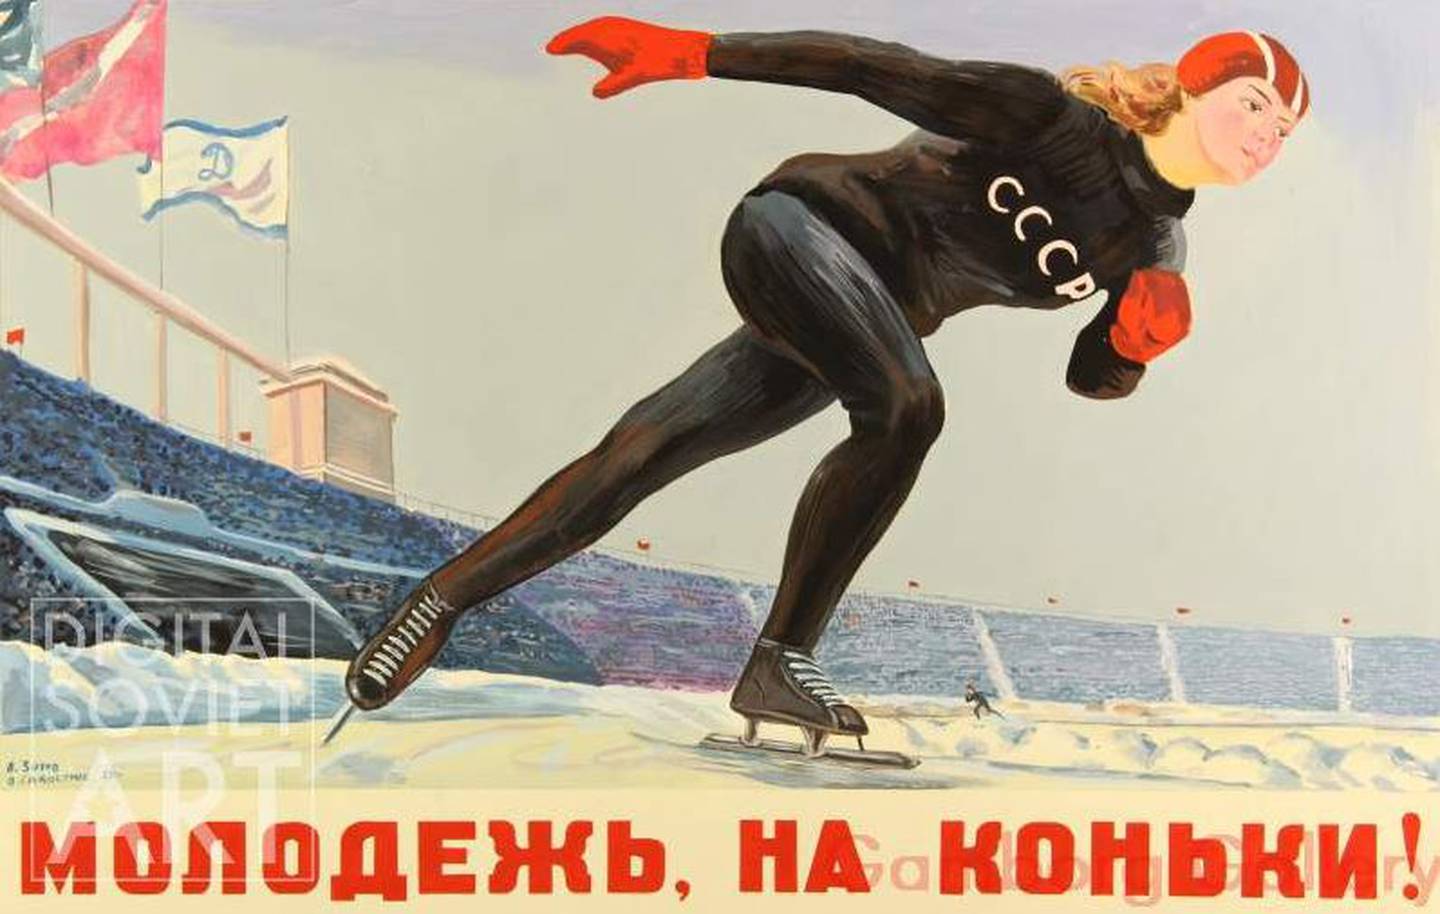 A Soviet poster encouraging young people to ice skate. Handout